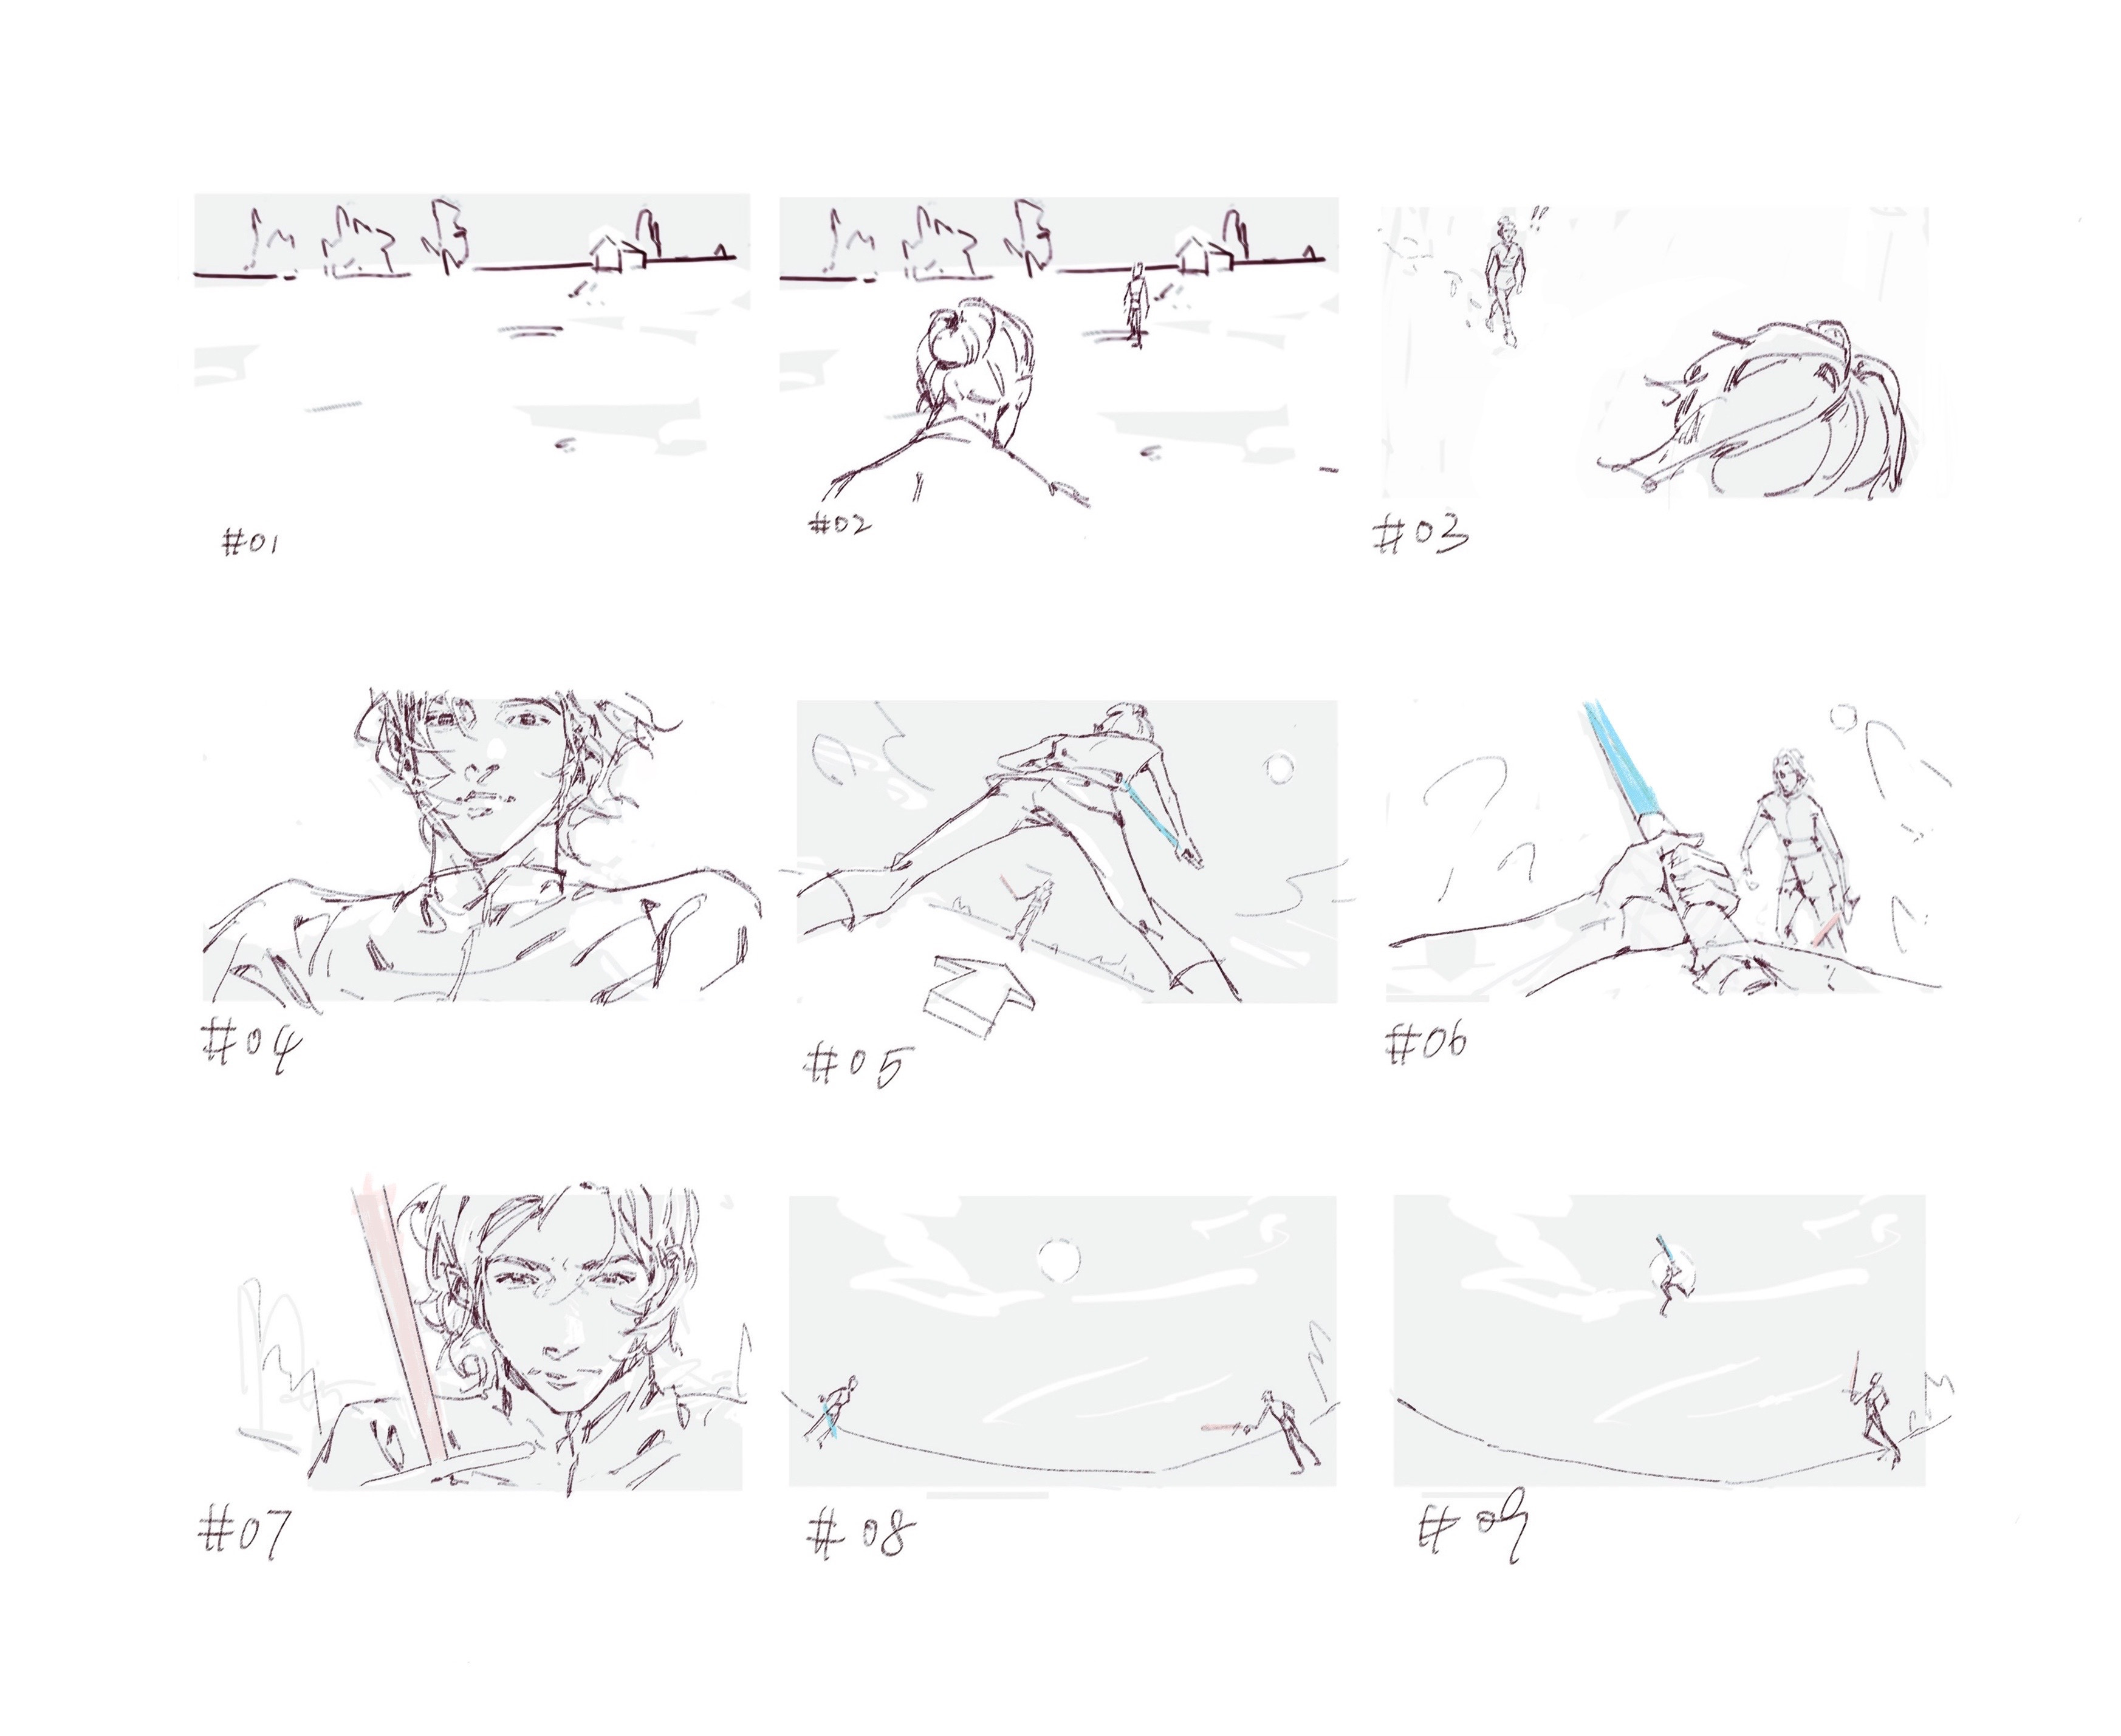 Storyboarding with AI: A Guide for Artists - Storyboard Artists Guide